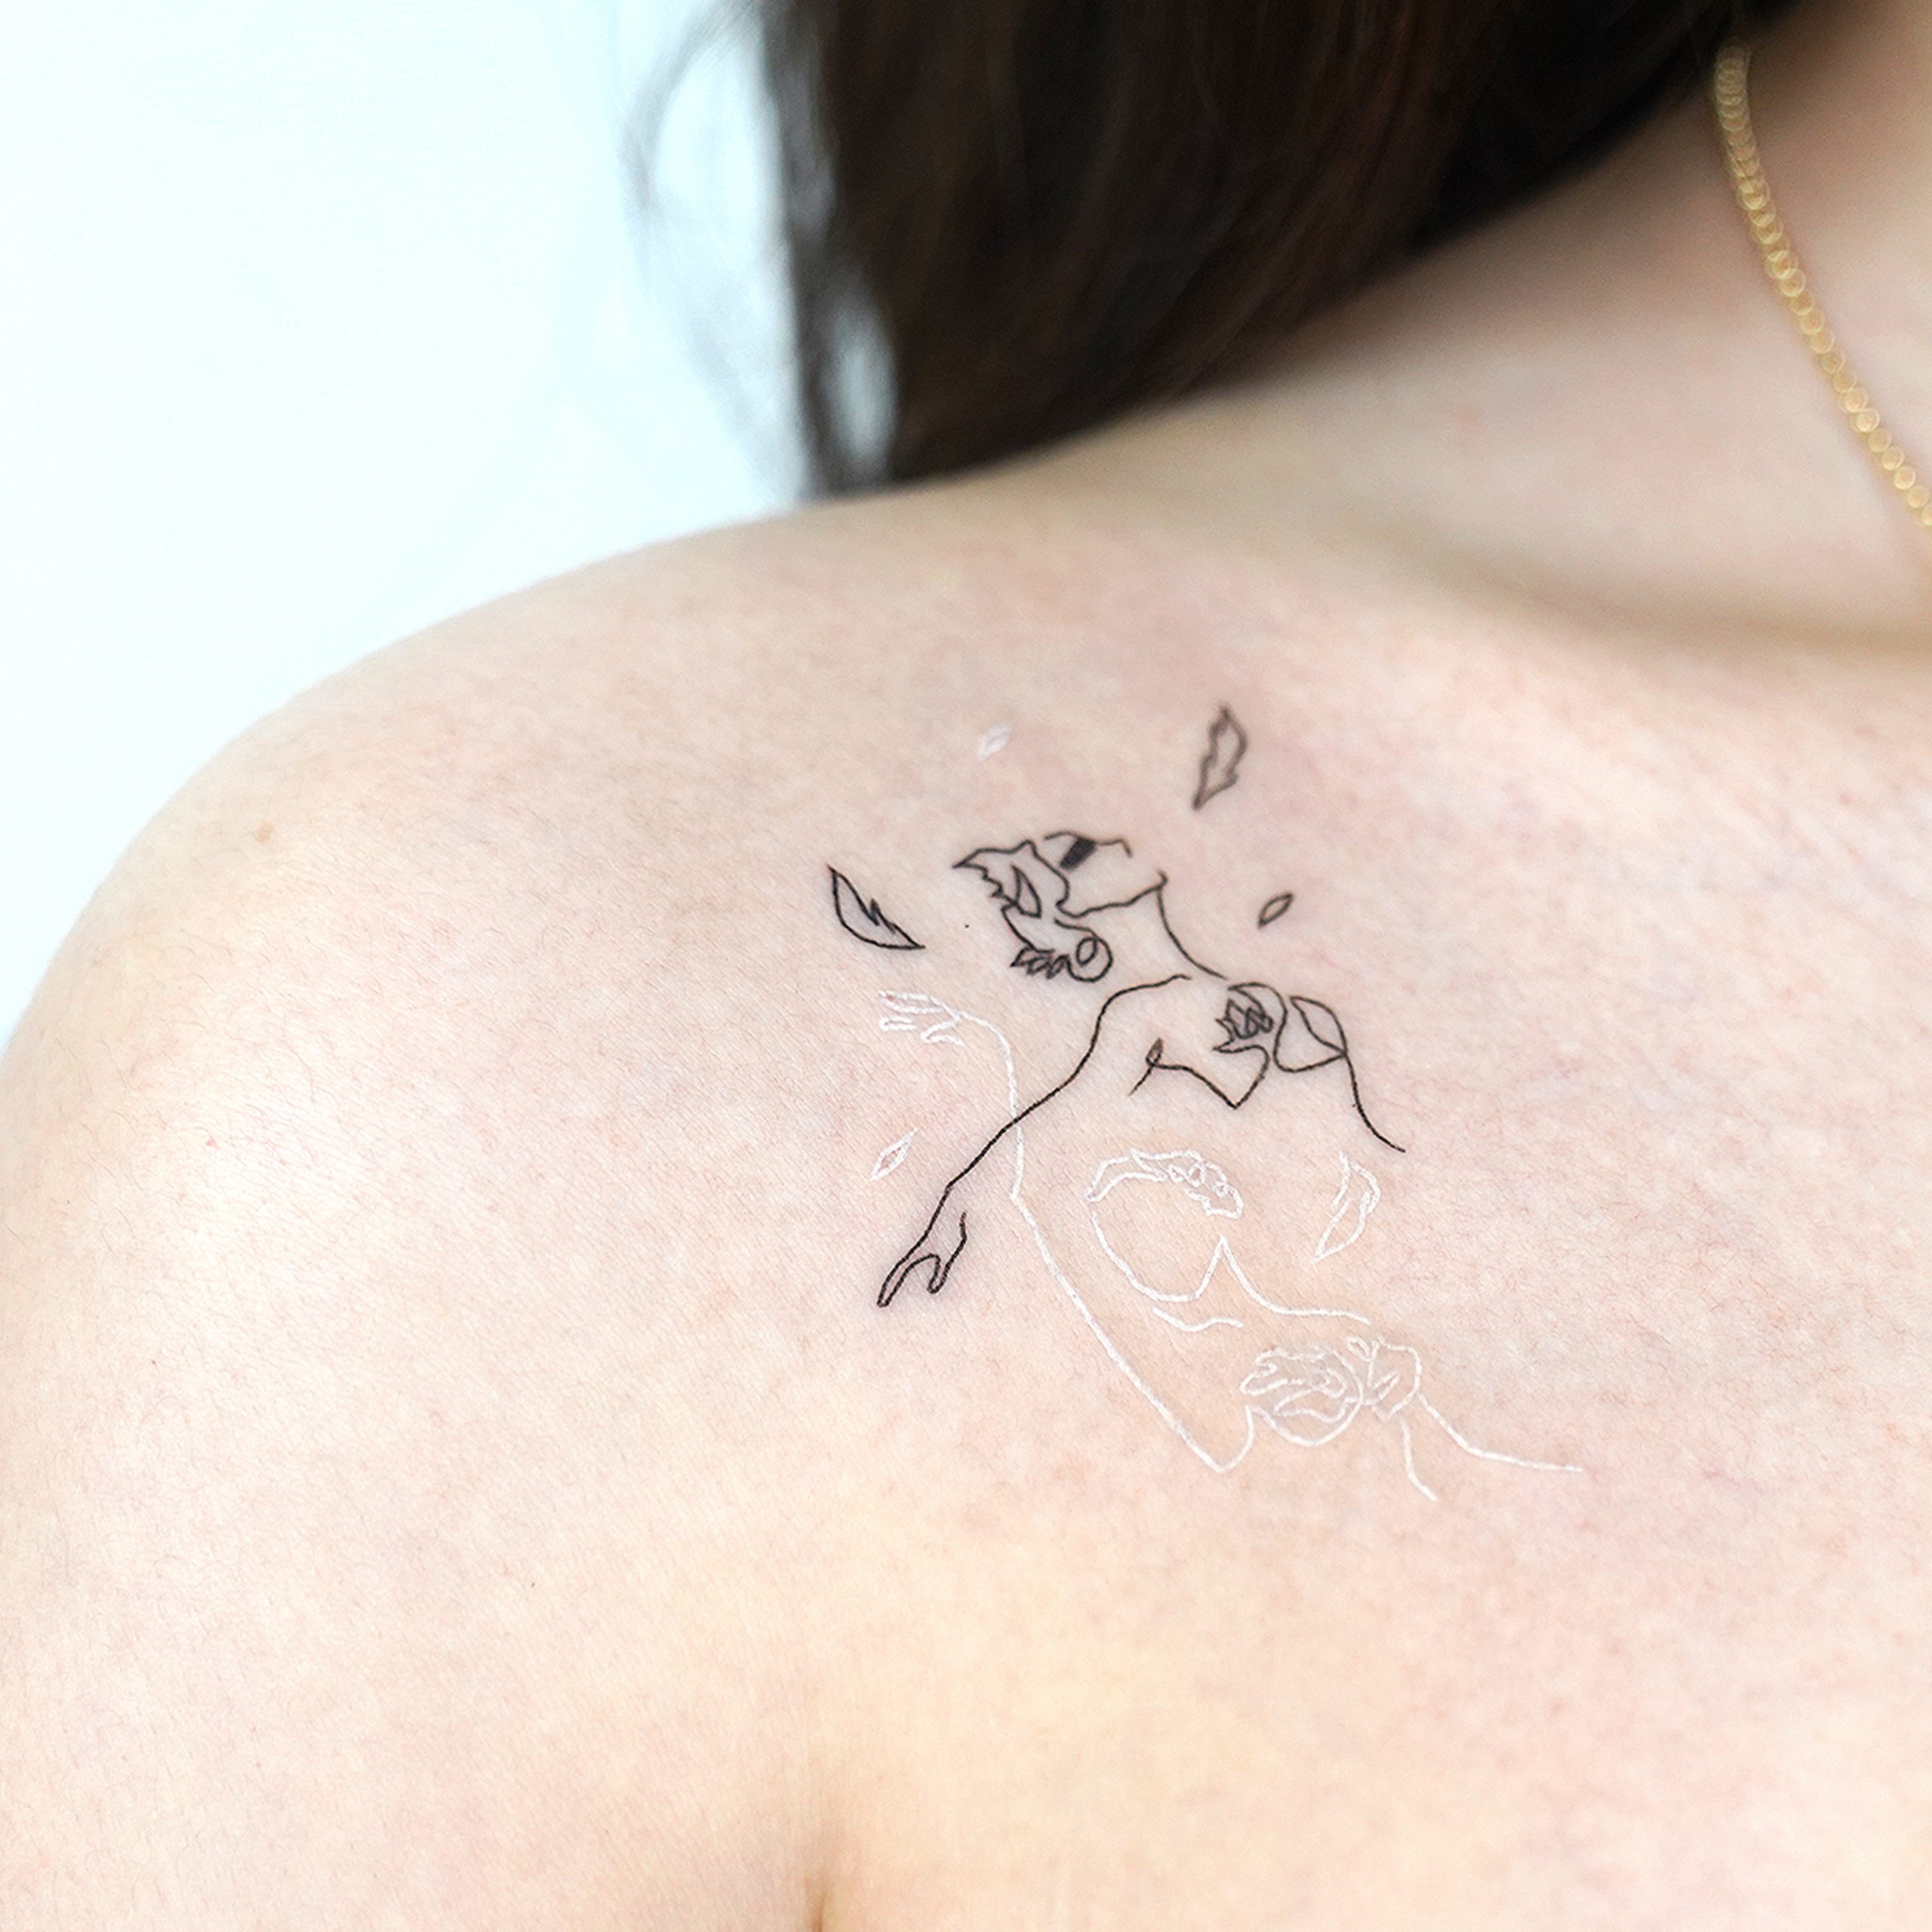 Are you looking for a new tattoo that is inspired by fine line